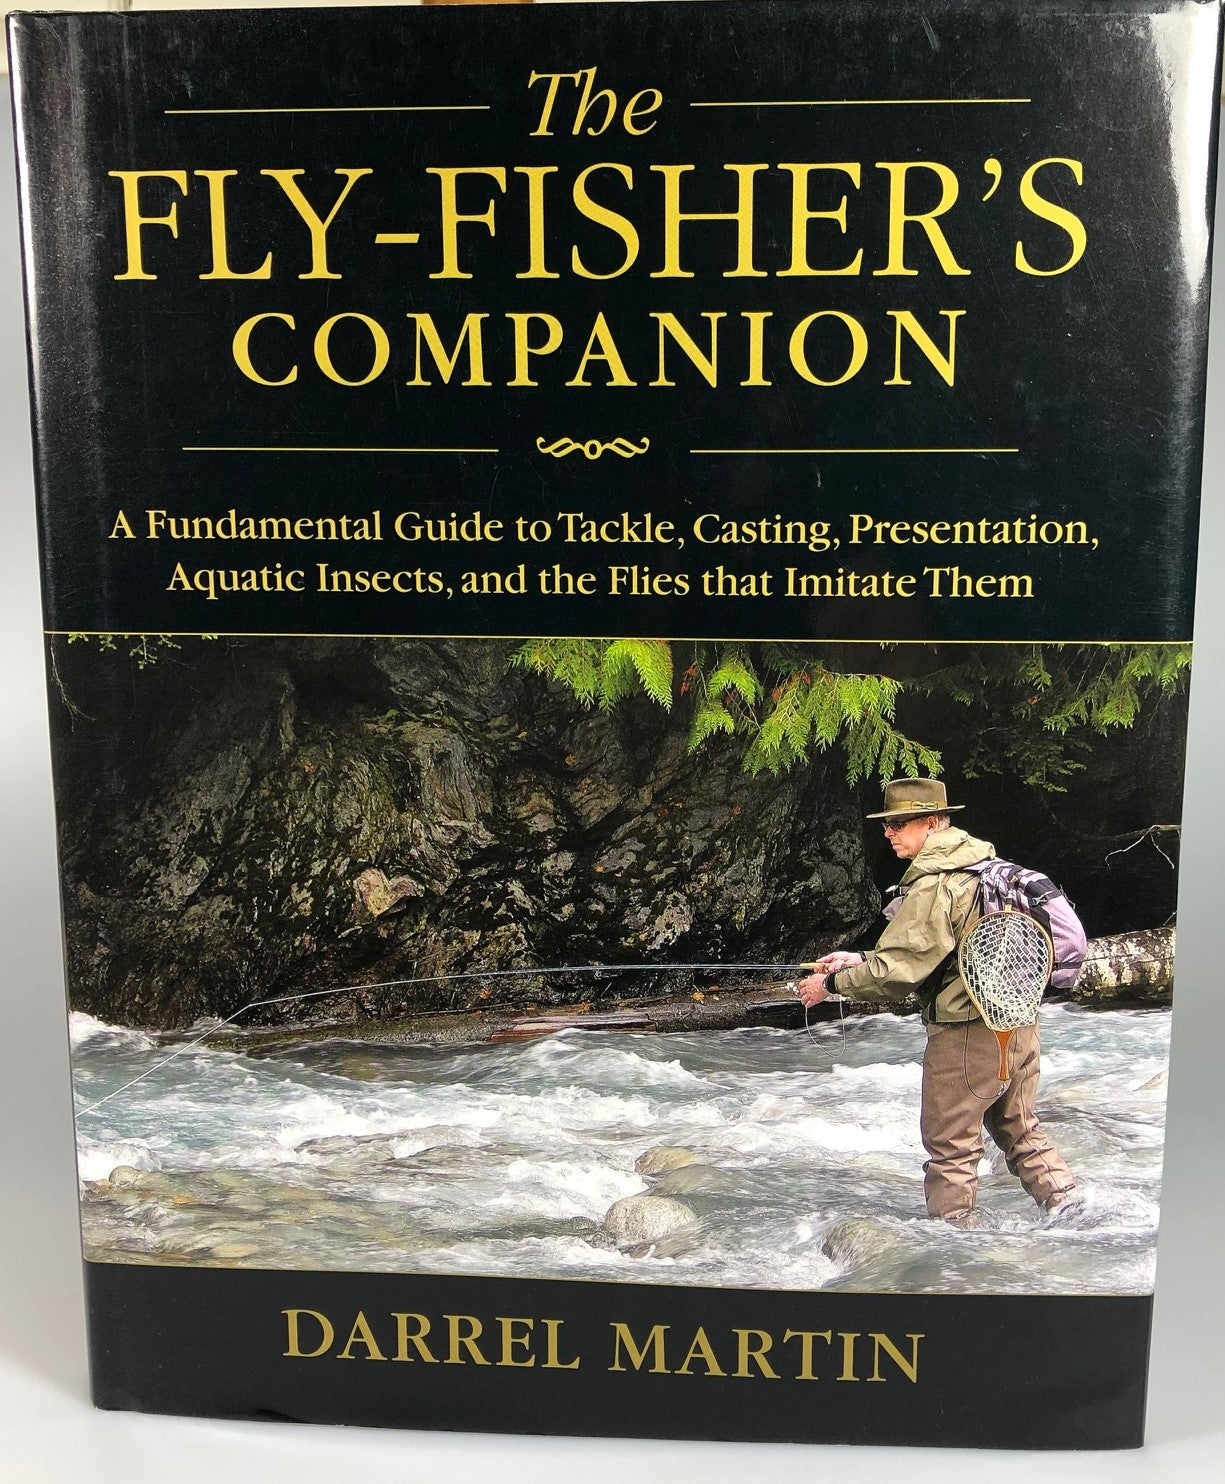 The Fly-Fisher's Companion by Darrel Martin